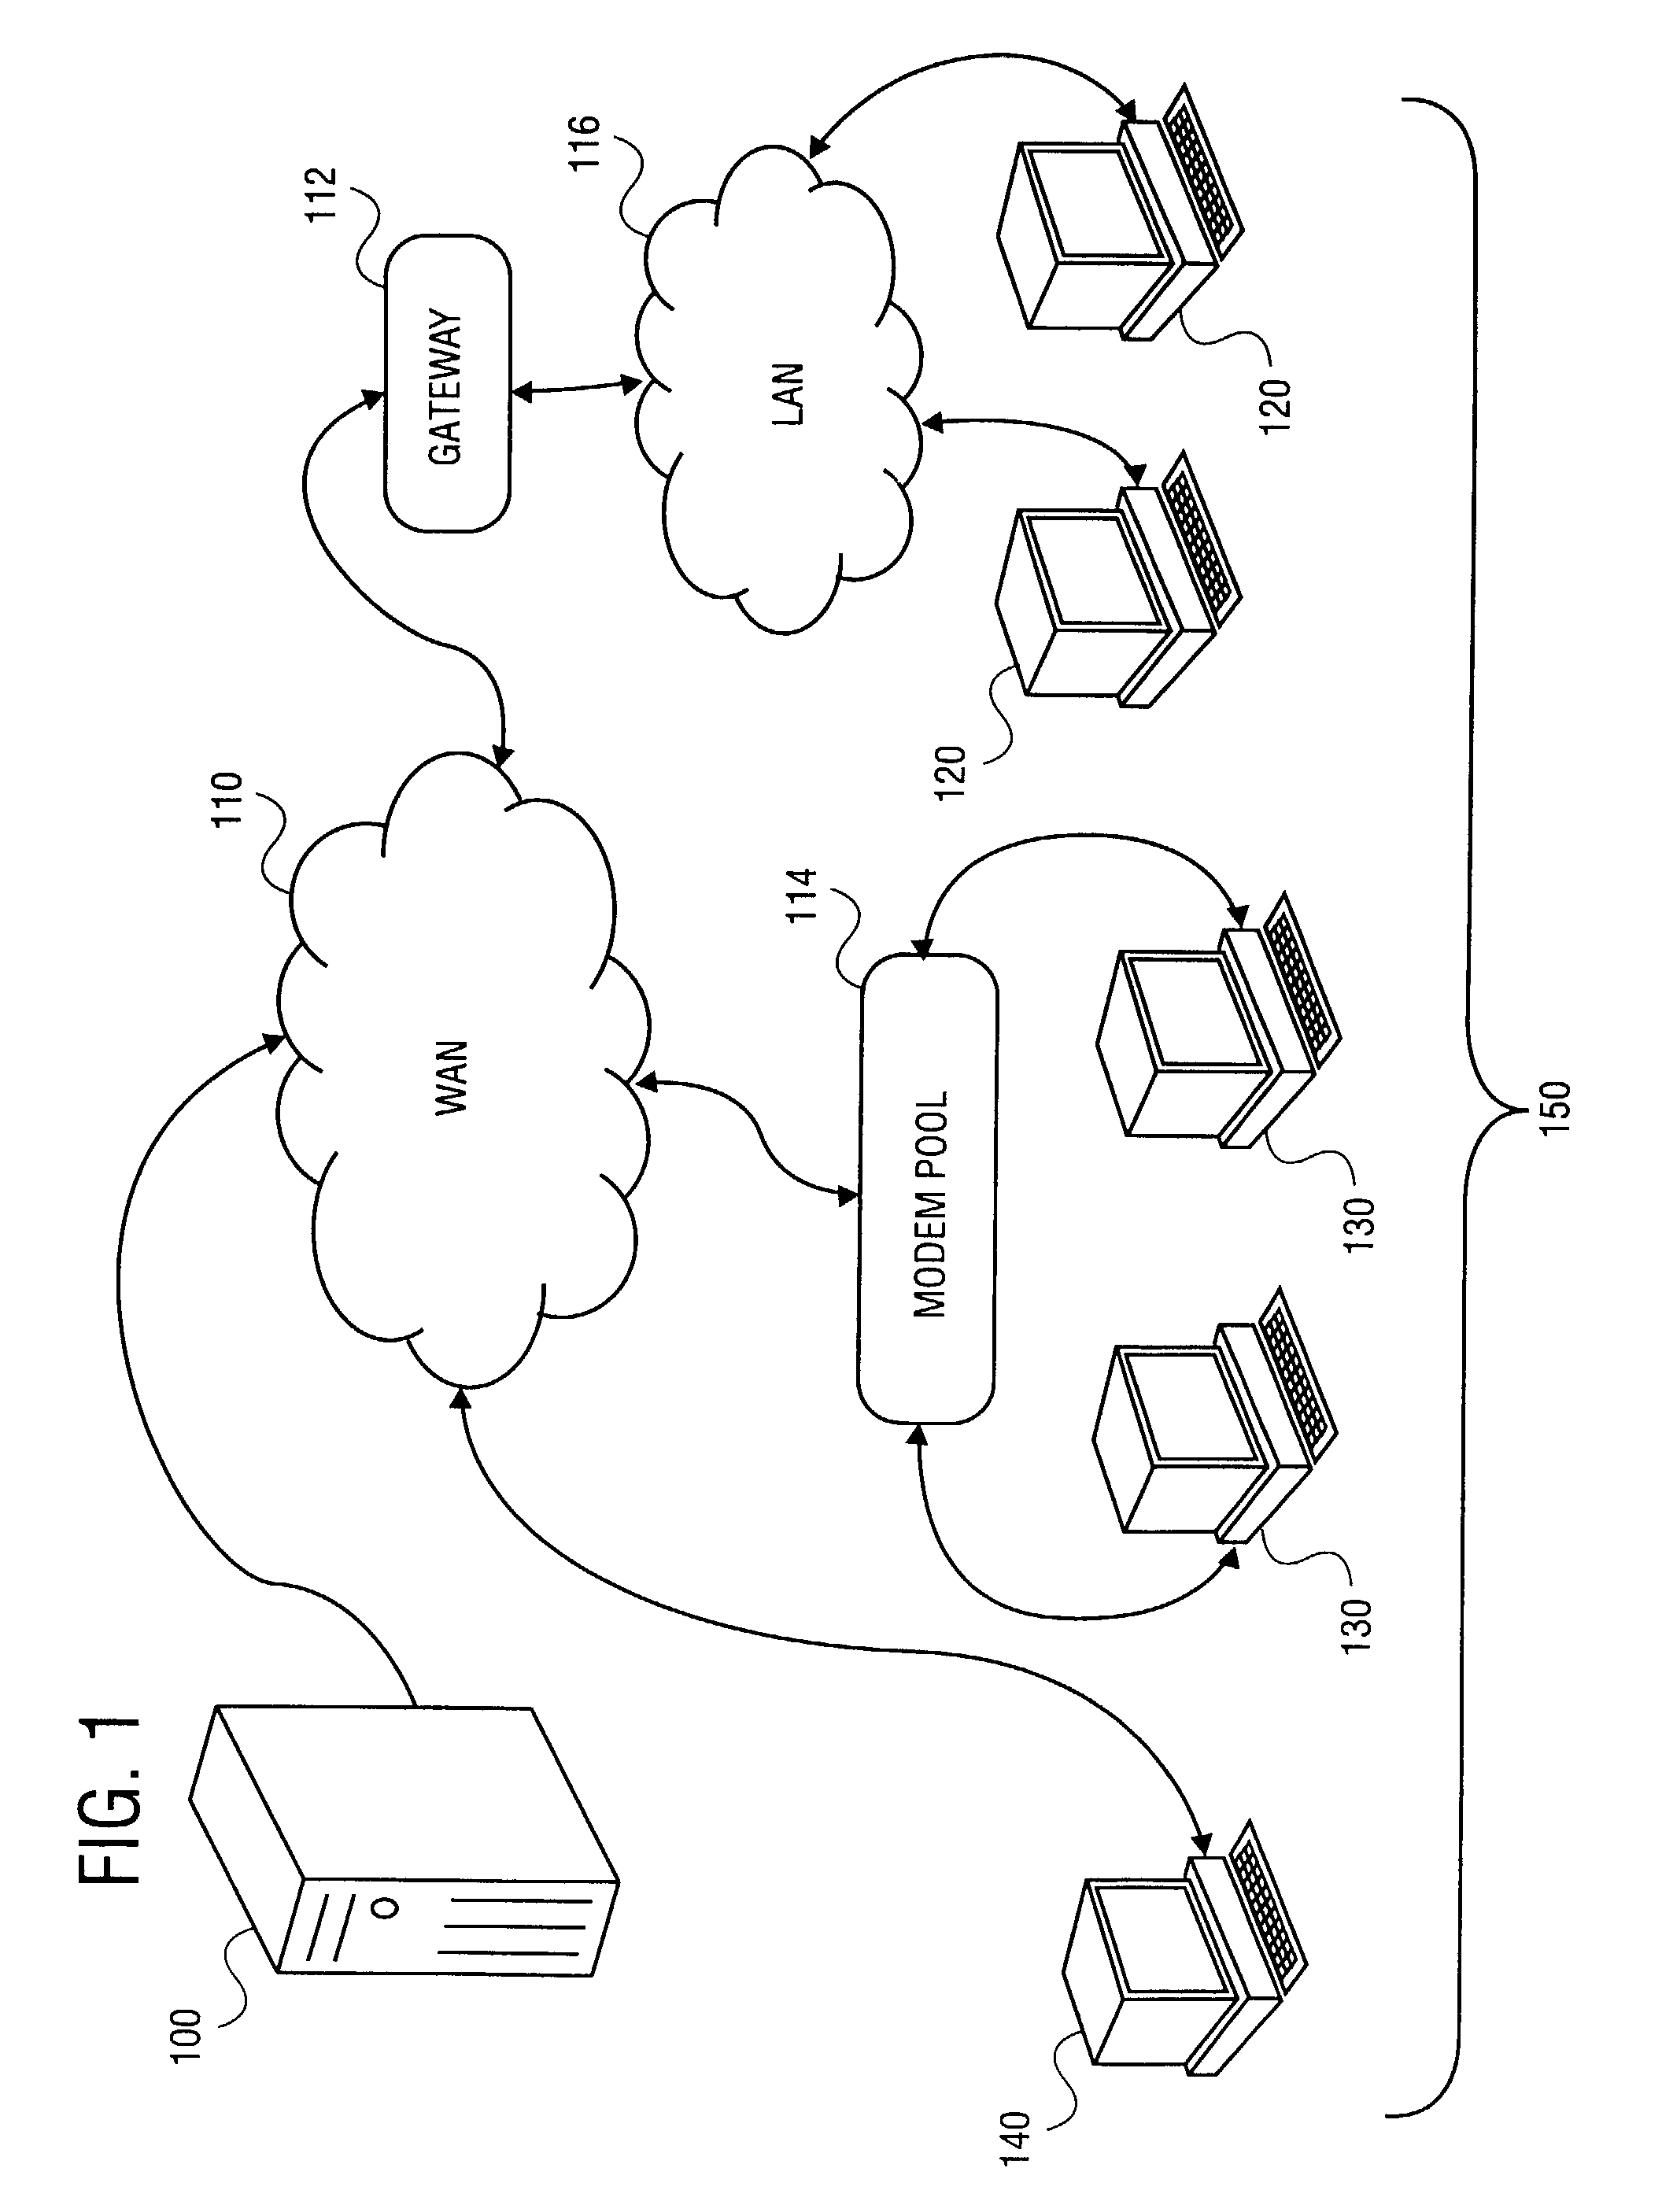 Method and apparatus for programmatic learned routing in an electronic form system